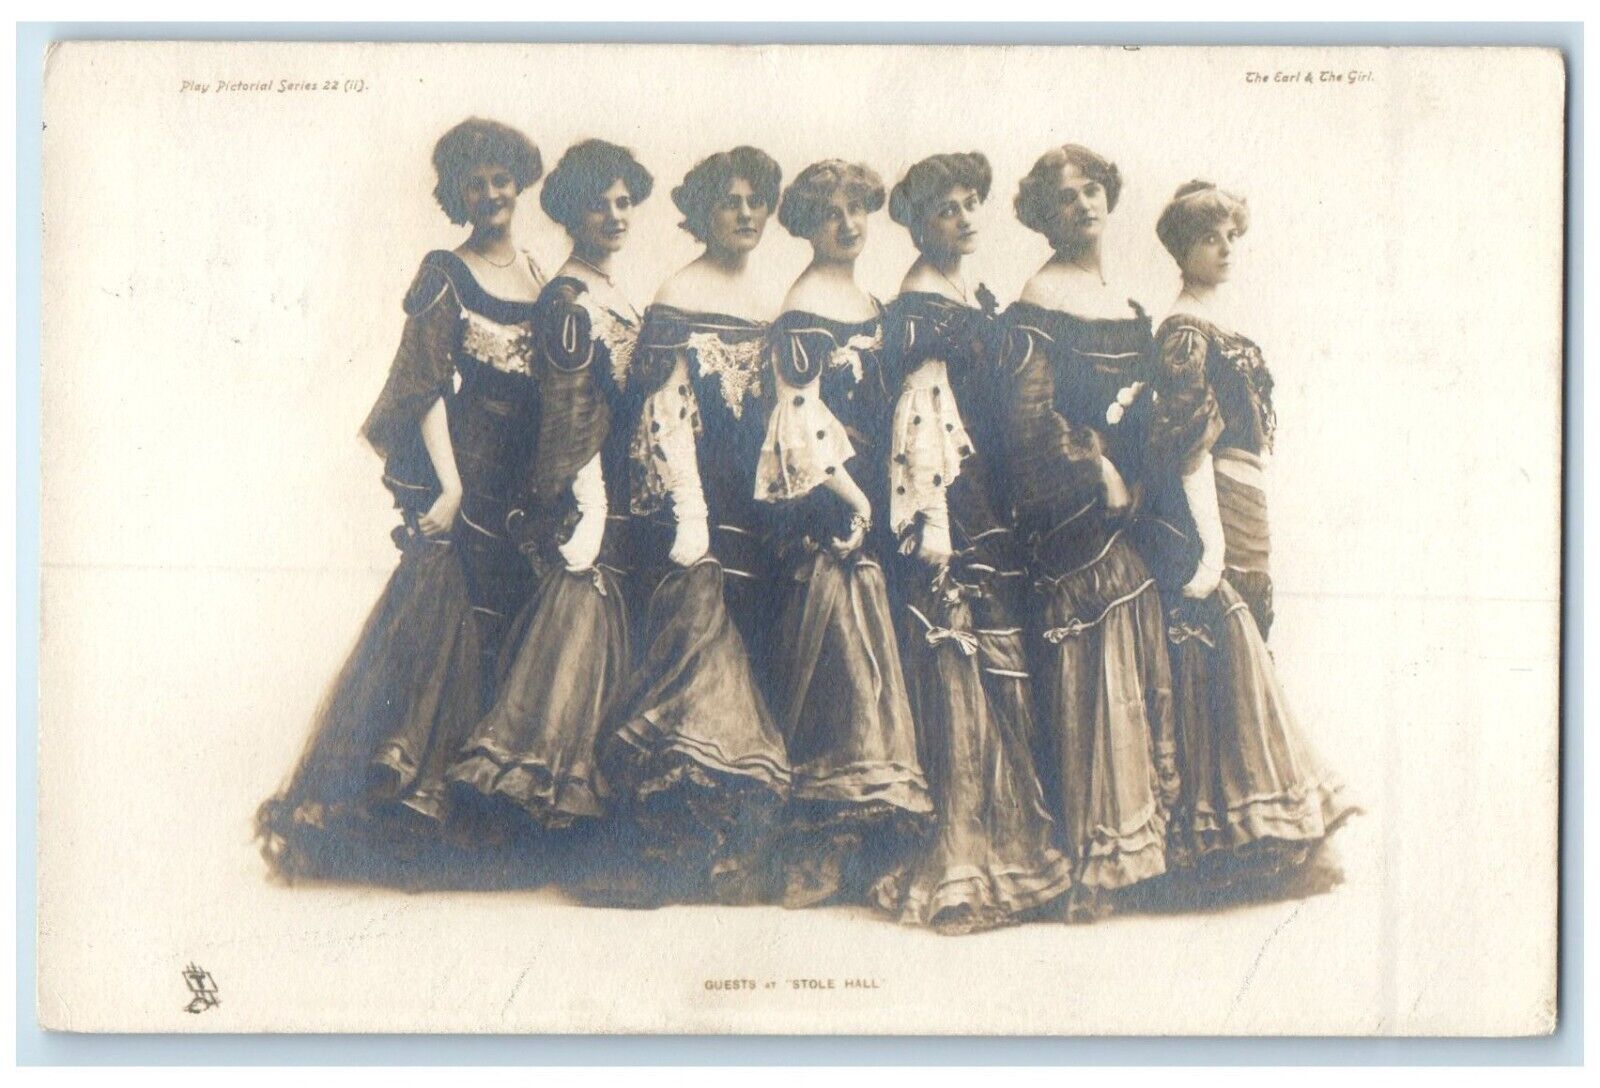 1908 Pretty Womens Guests At Stole Hall Theater RPPC Photo Tuck\'s Postcard